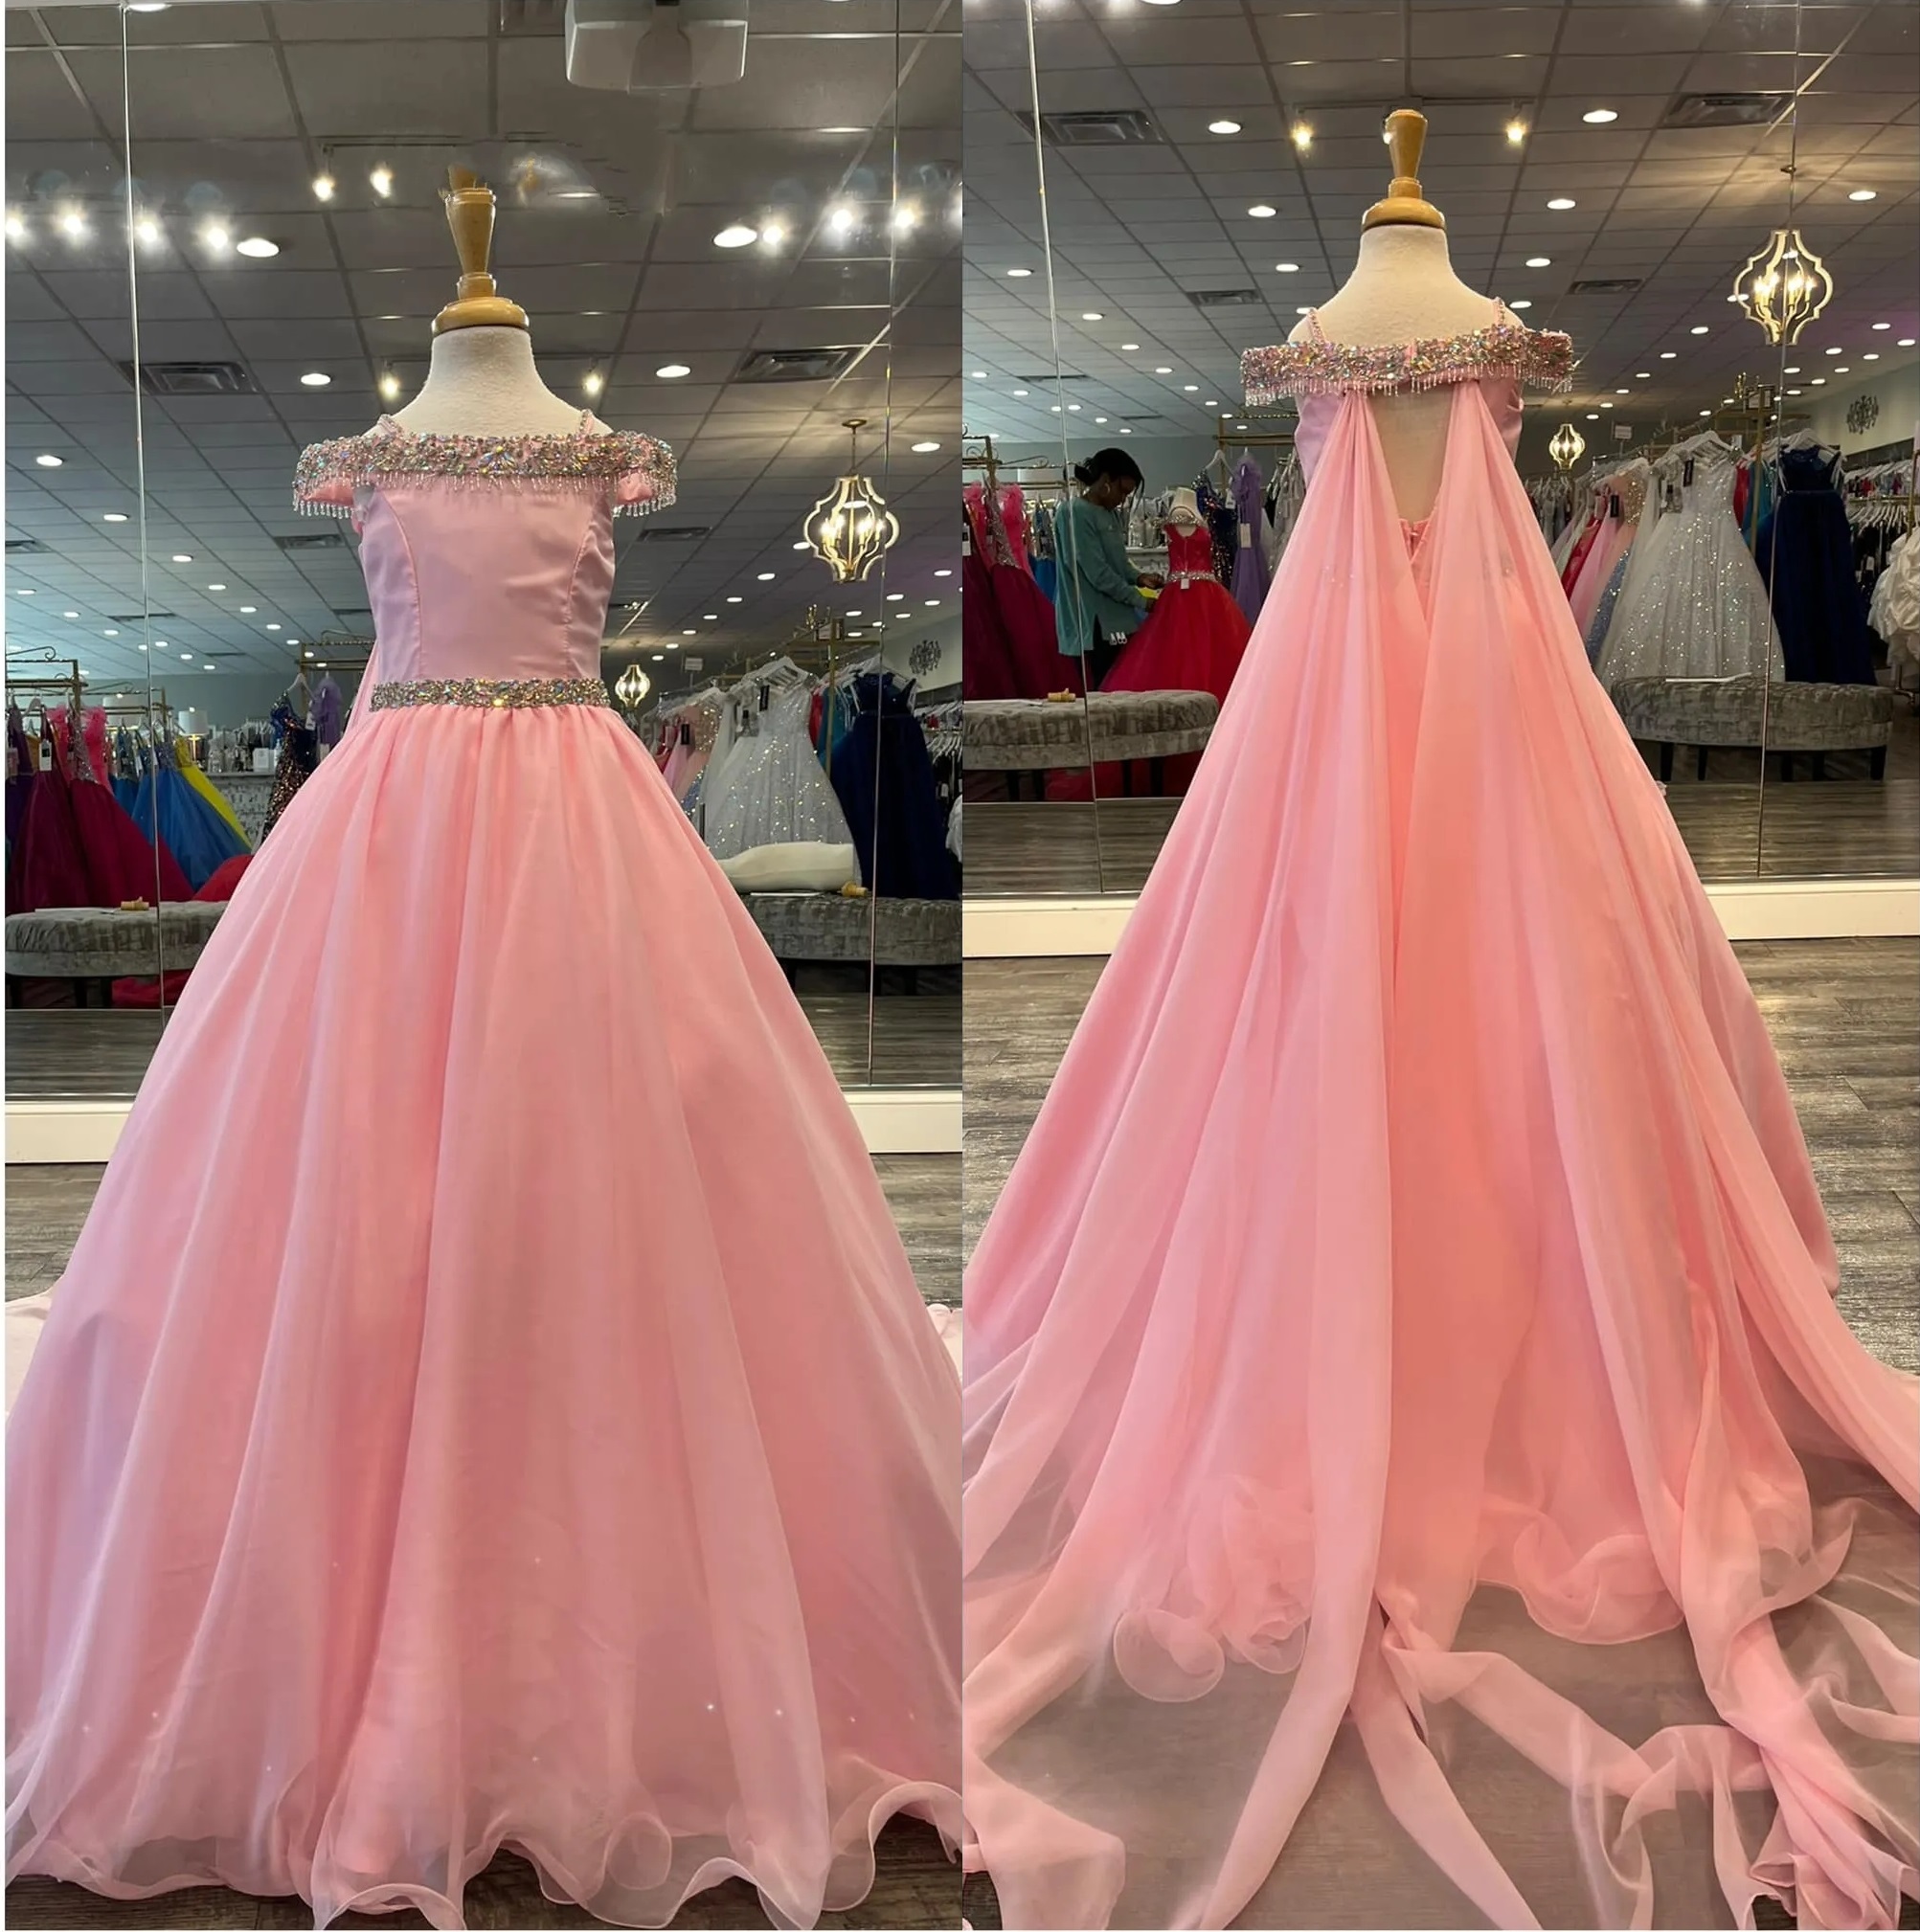 

Pink Girls Pageant Dress Ballgown with Cape Beading Chiffon Little Kid Birthday Formal Party Wedding Guest Runway Gown Toddler Teens Preteen Off-the-Shoulder